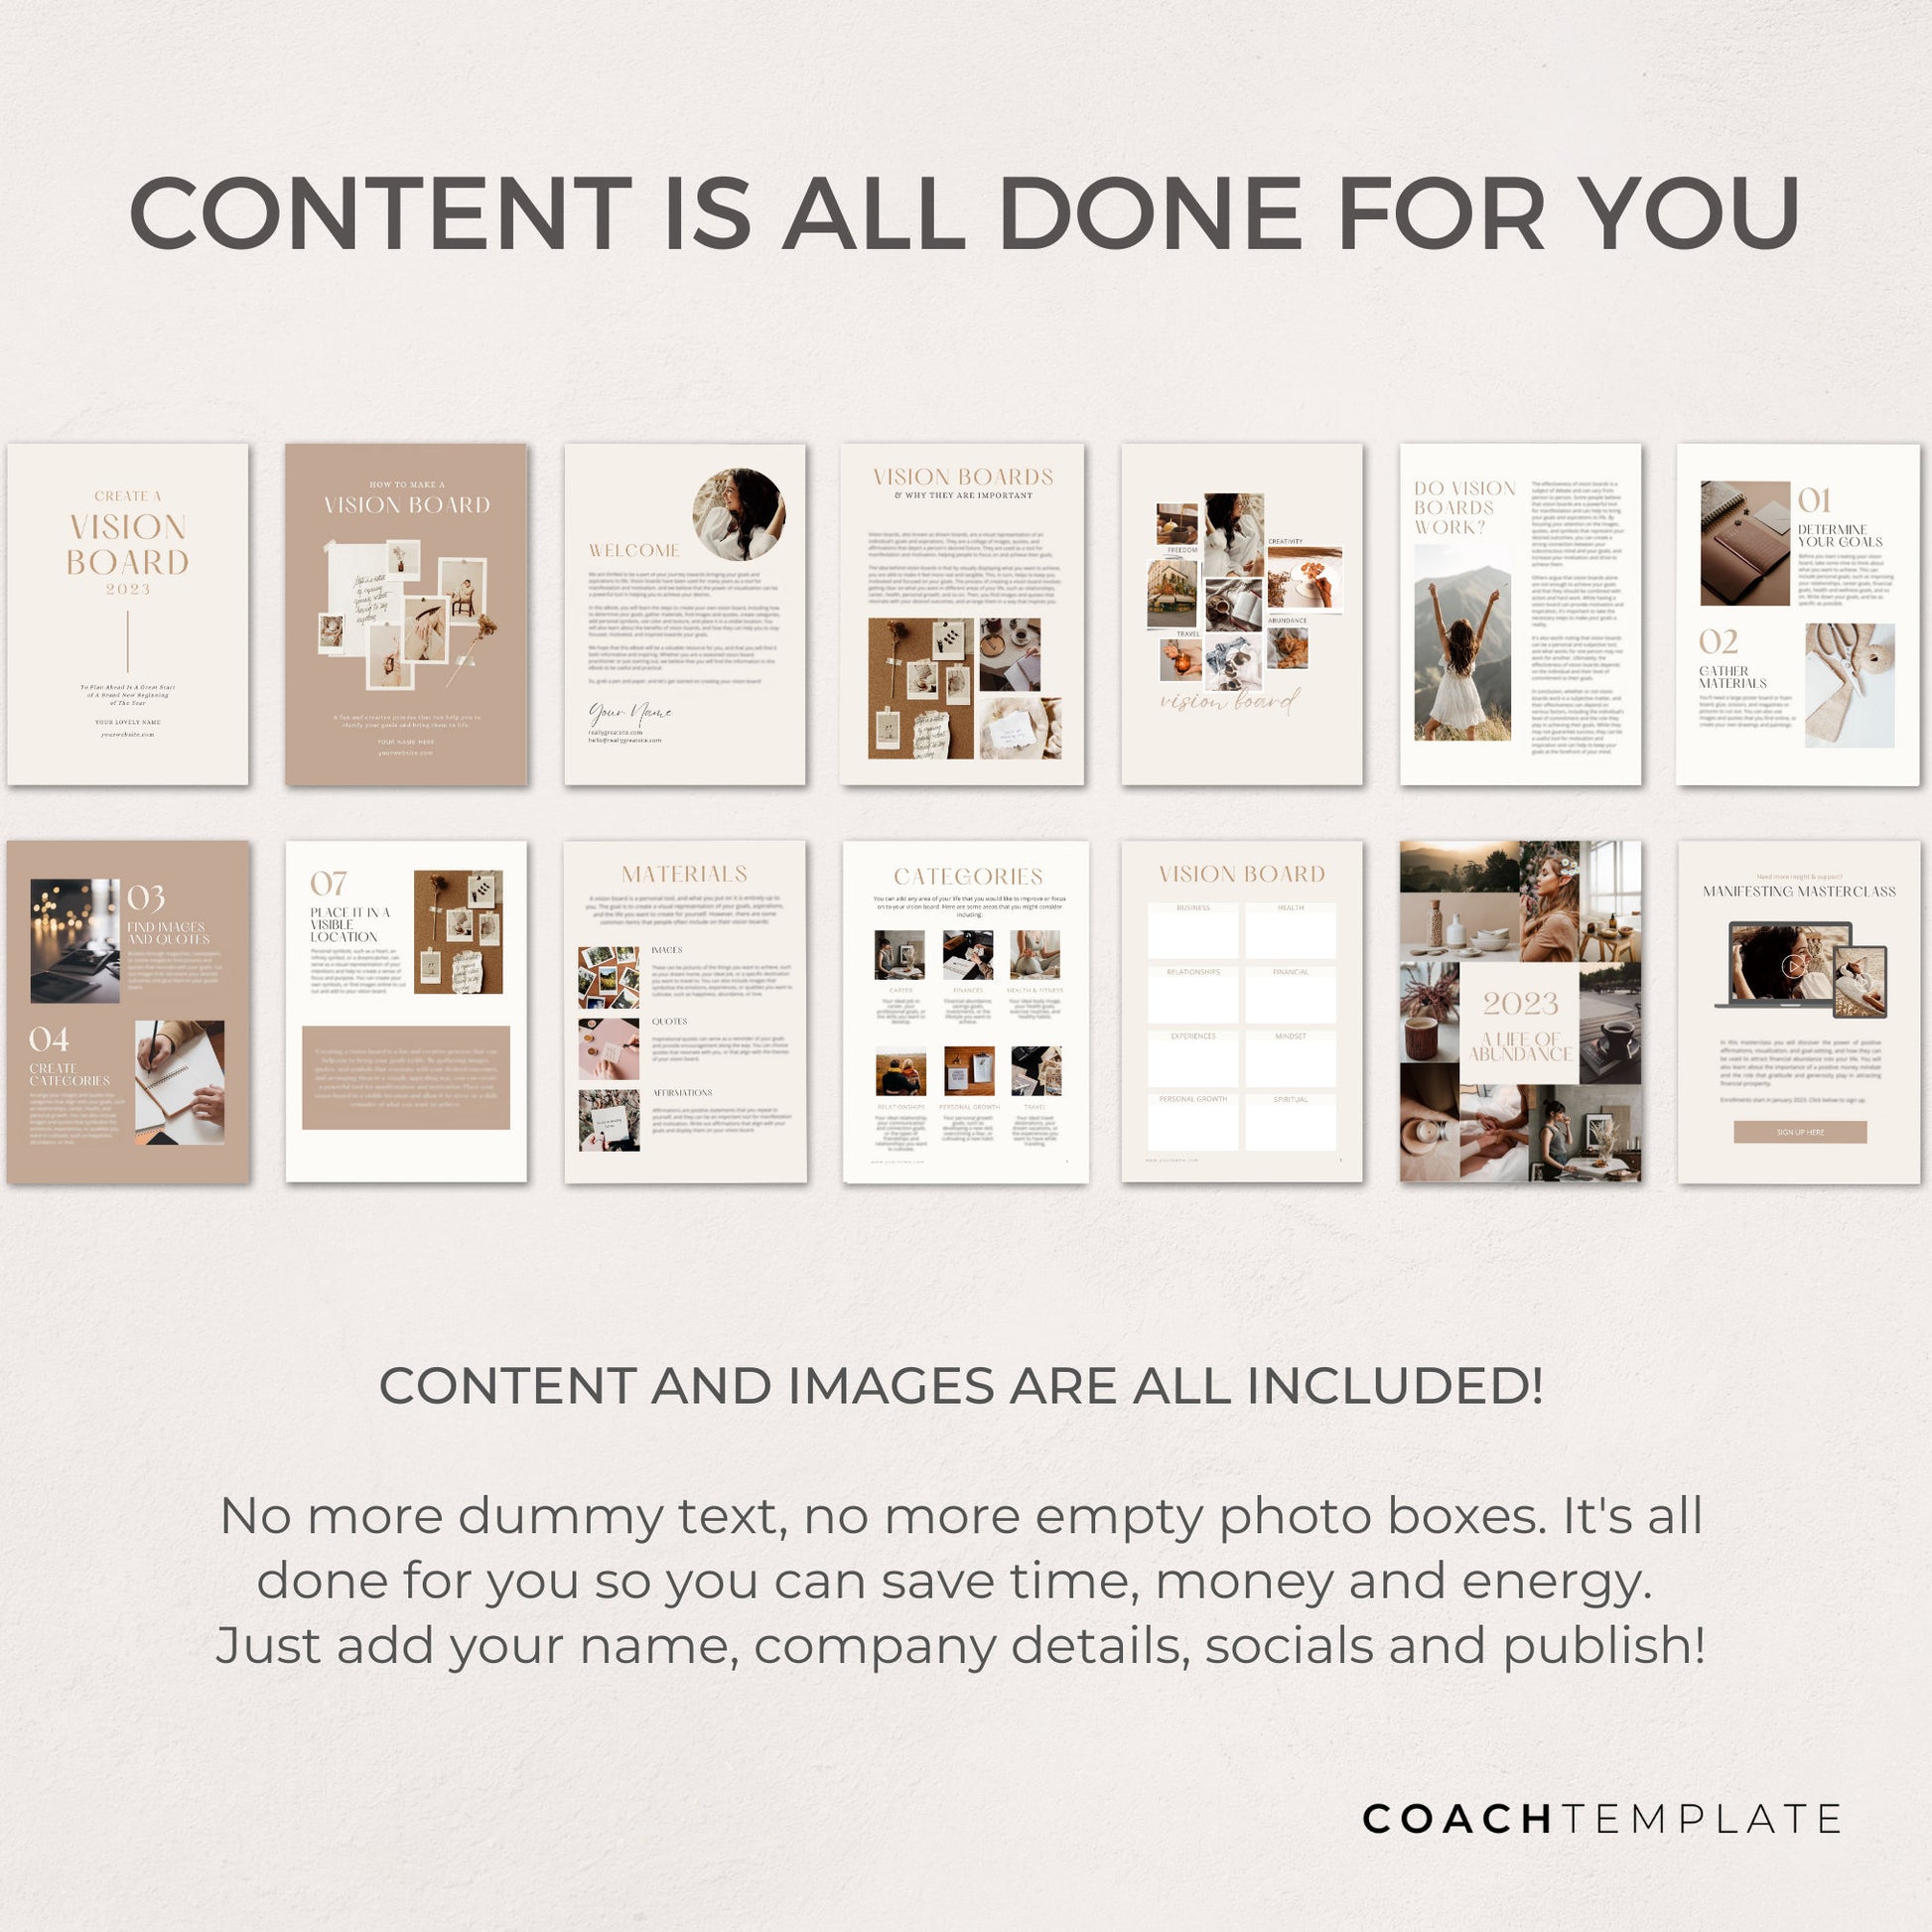 Create a Vision Board eBook Workbook Template Canva with Done-for-You Content | Manifesting Mindset Life Coach Small Business Commercial Use

CoachTemplate.com CT058